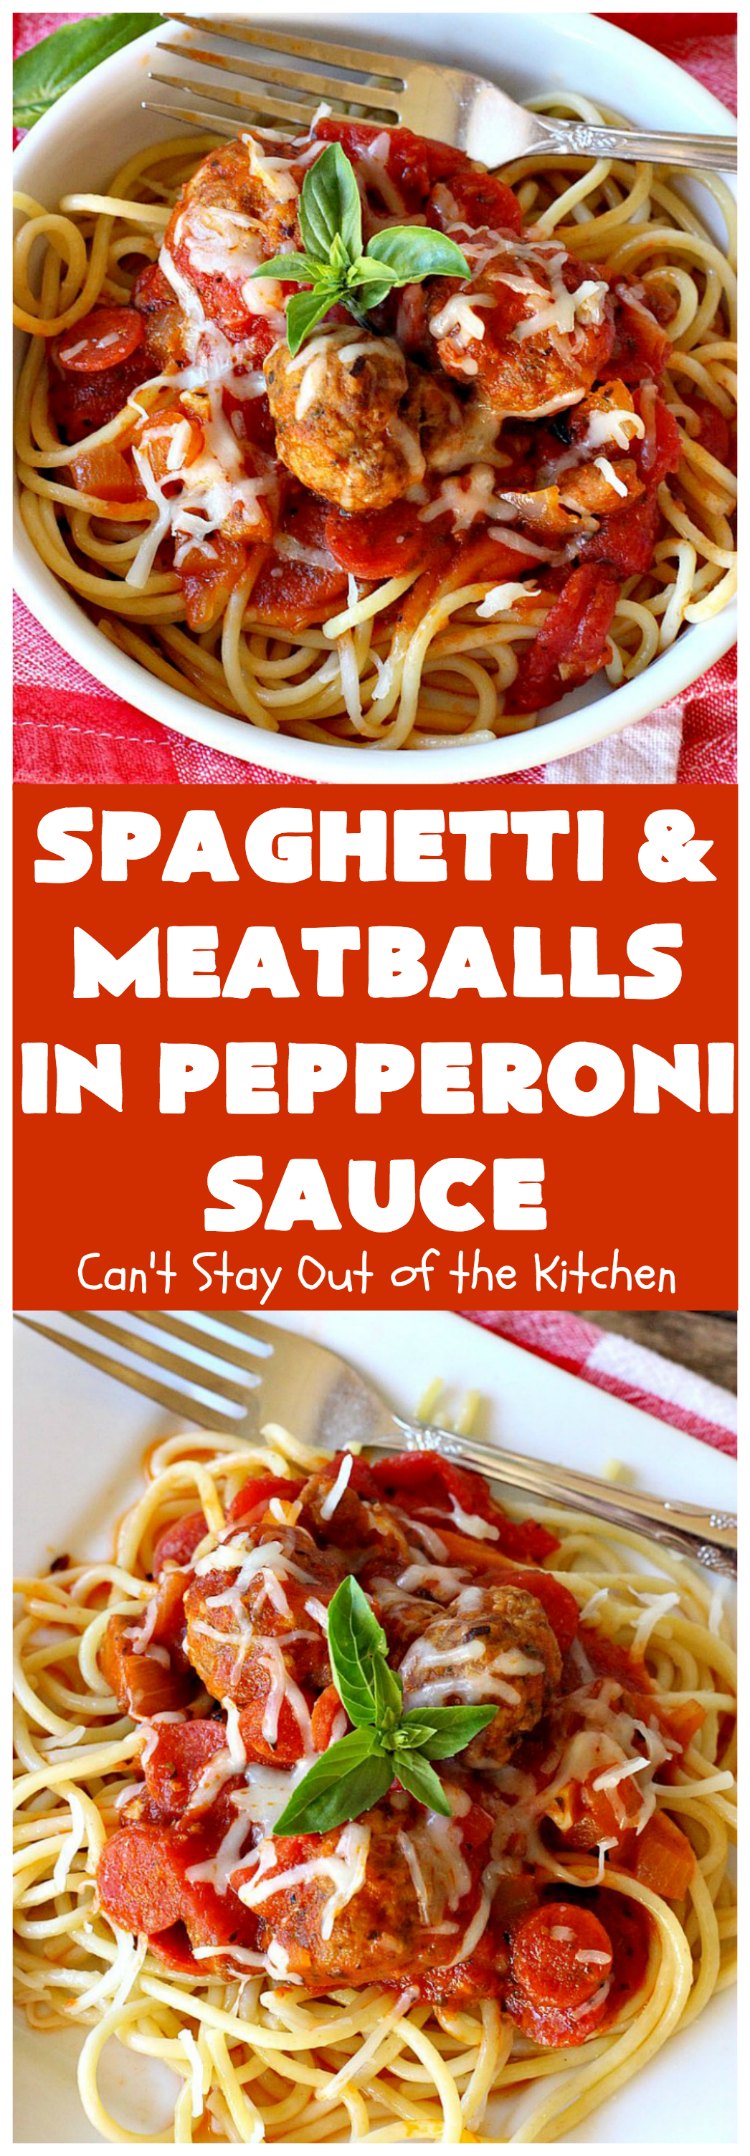 Spaghetti and Meatballs in Pepperoni Sauce | Can't Stay Out of the Kitchen